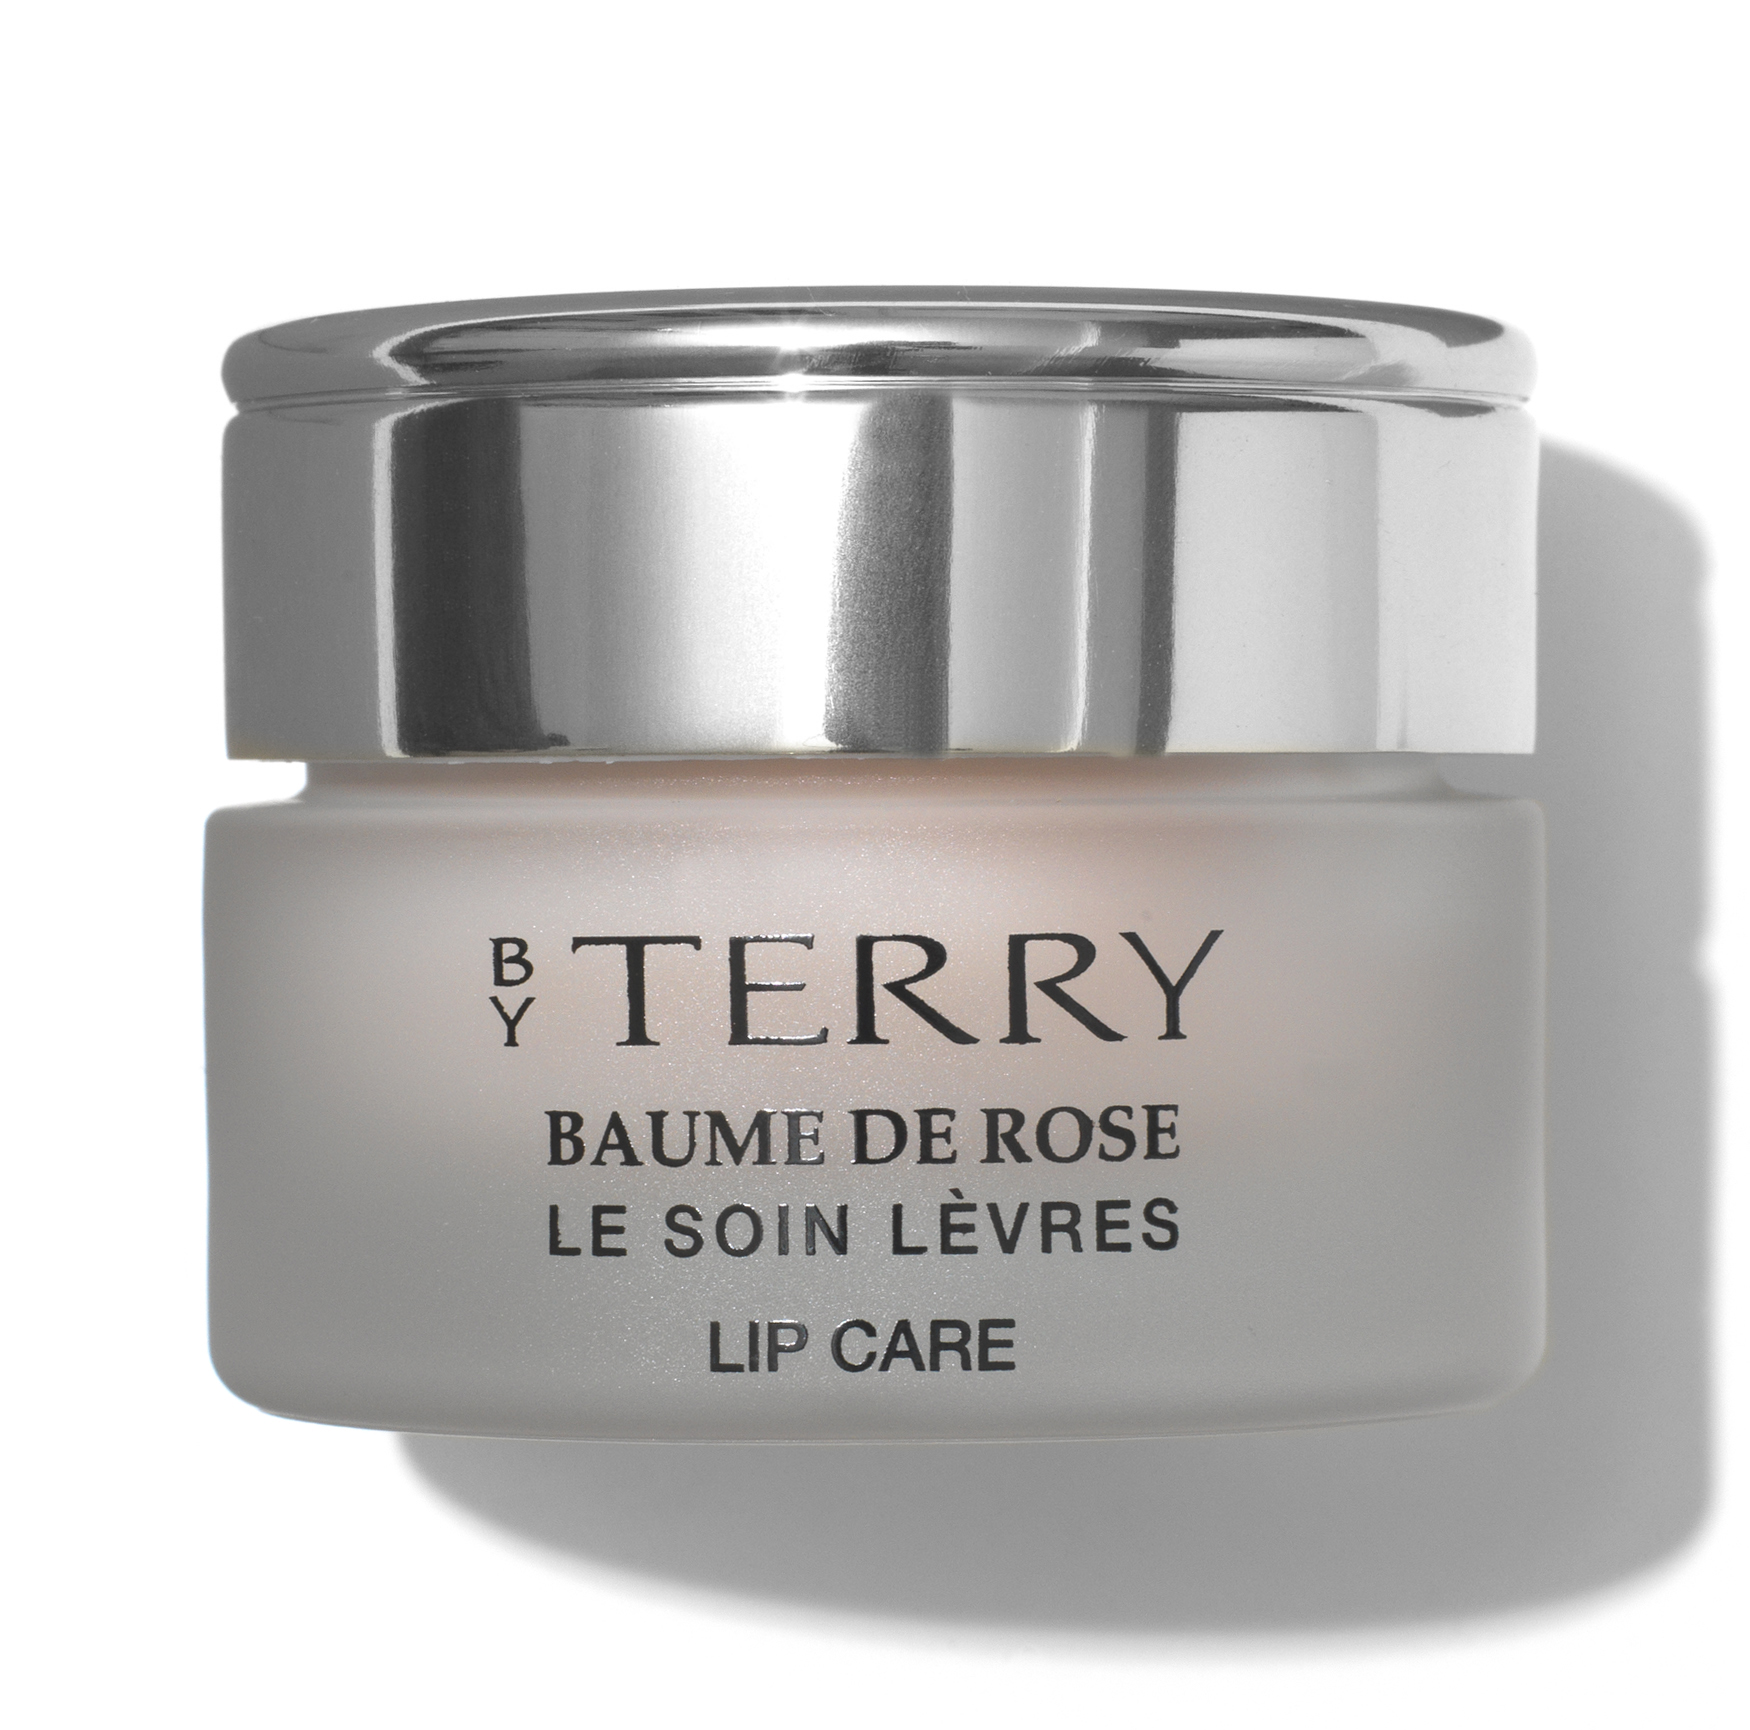 Baume de Rose SPF 15 - BY TERRY | Space NK